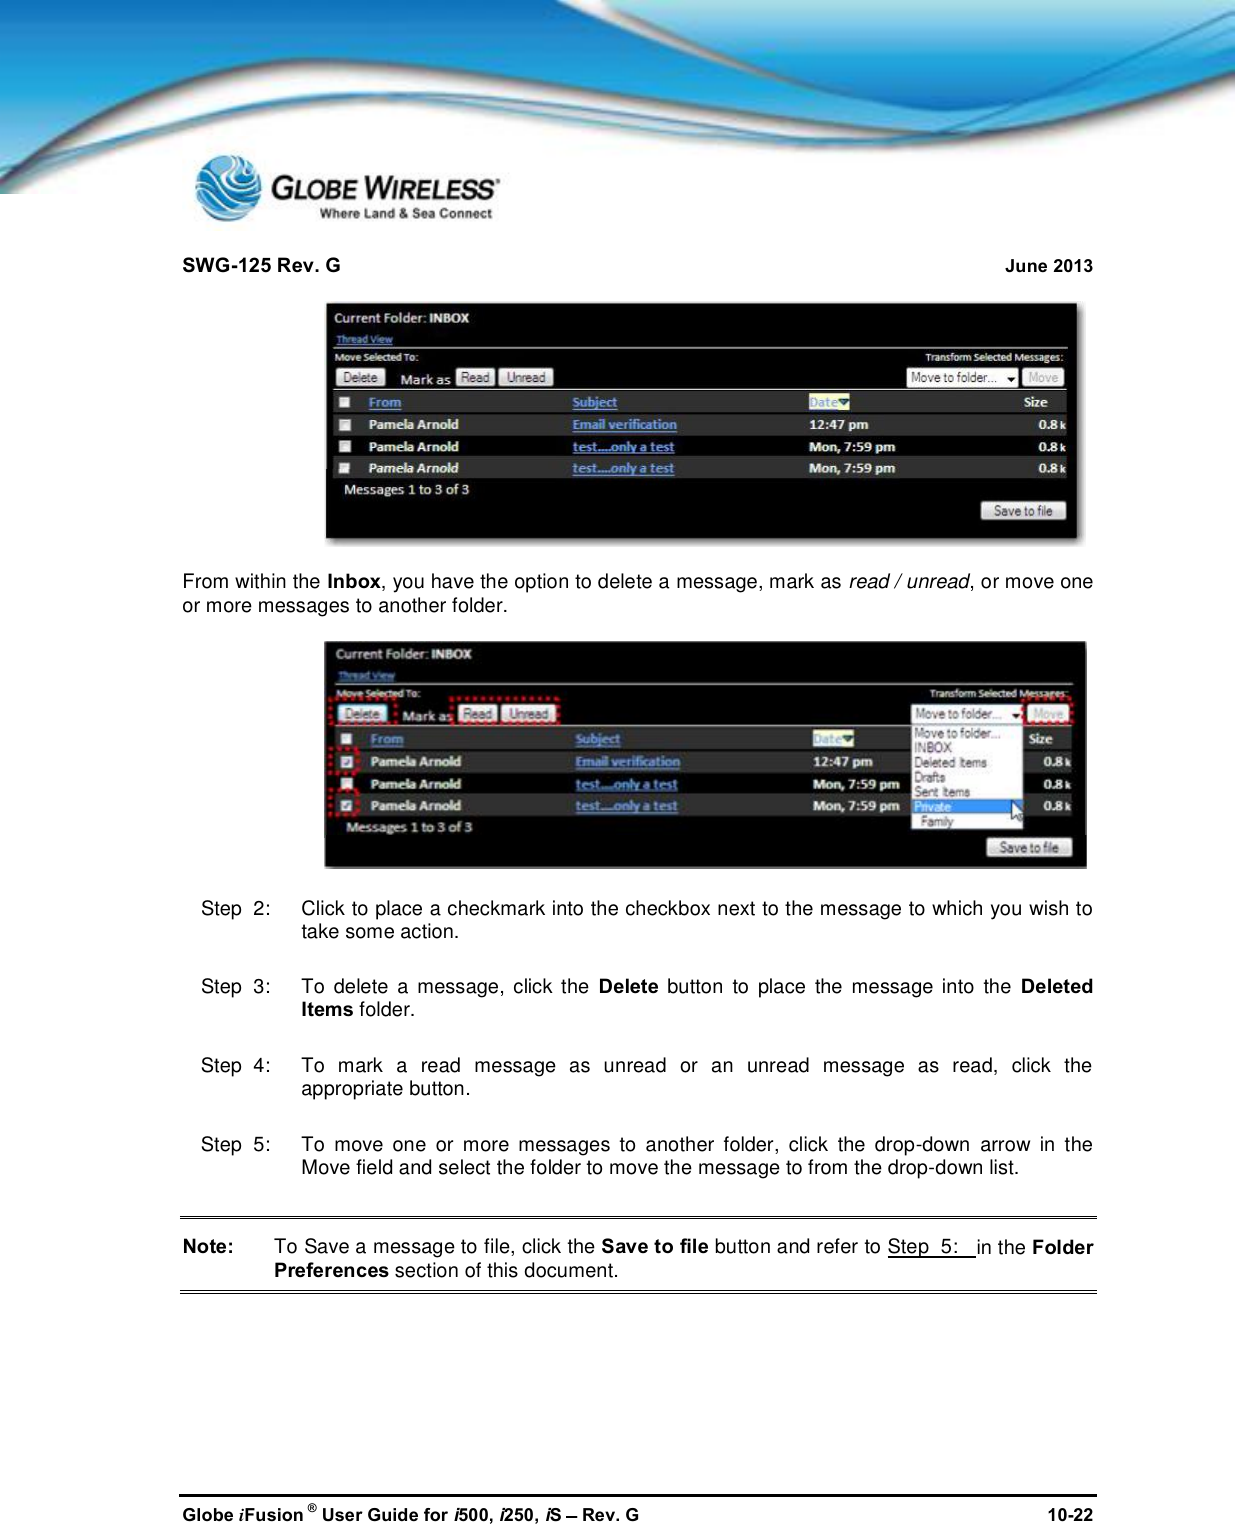 SWG-125 Rev. G June 2013Globe iFusion ®User Guide for i500, i250, iSRev. G 10-22From within the Inbox, you have the option to delete a message, mark as read / unread, or move oneor more messages to another folder.Step  2:   Click to place a checkmark into the checkbox next to the message to which you wish totake some action.Step  3:   To delete a message, click the Delete button to place the message into the DeletedItems folder.Step  4:   To mark a read message as unread or an unread message as read, click theappropriate button.Step  5:   To move one or more messages to another folder, click the drop-down arrow in theMove field and select the folder to move the message to from the drop-down list.Note: To Save a message to file, click the Save to file button and refer to Step  5: in the FolderPreferences section of this document.